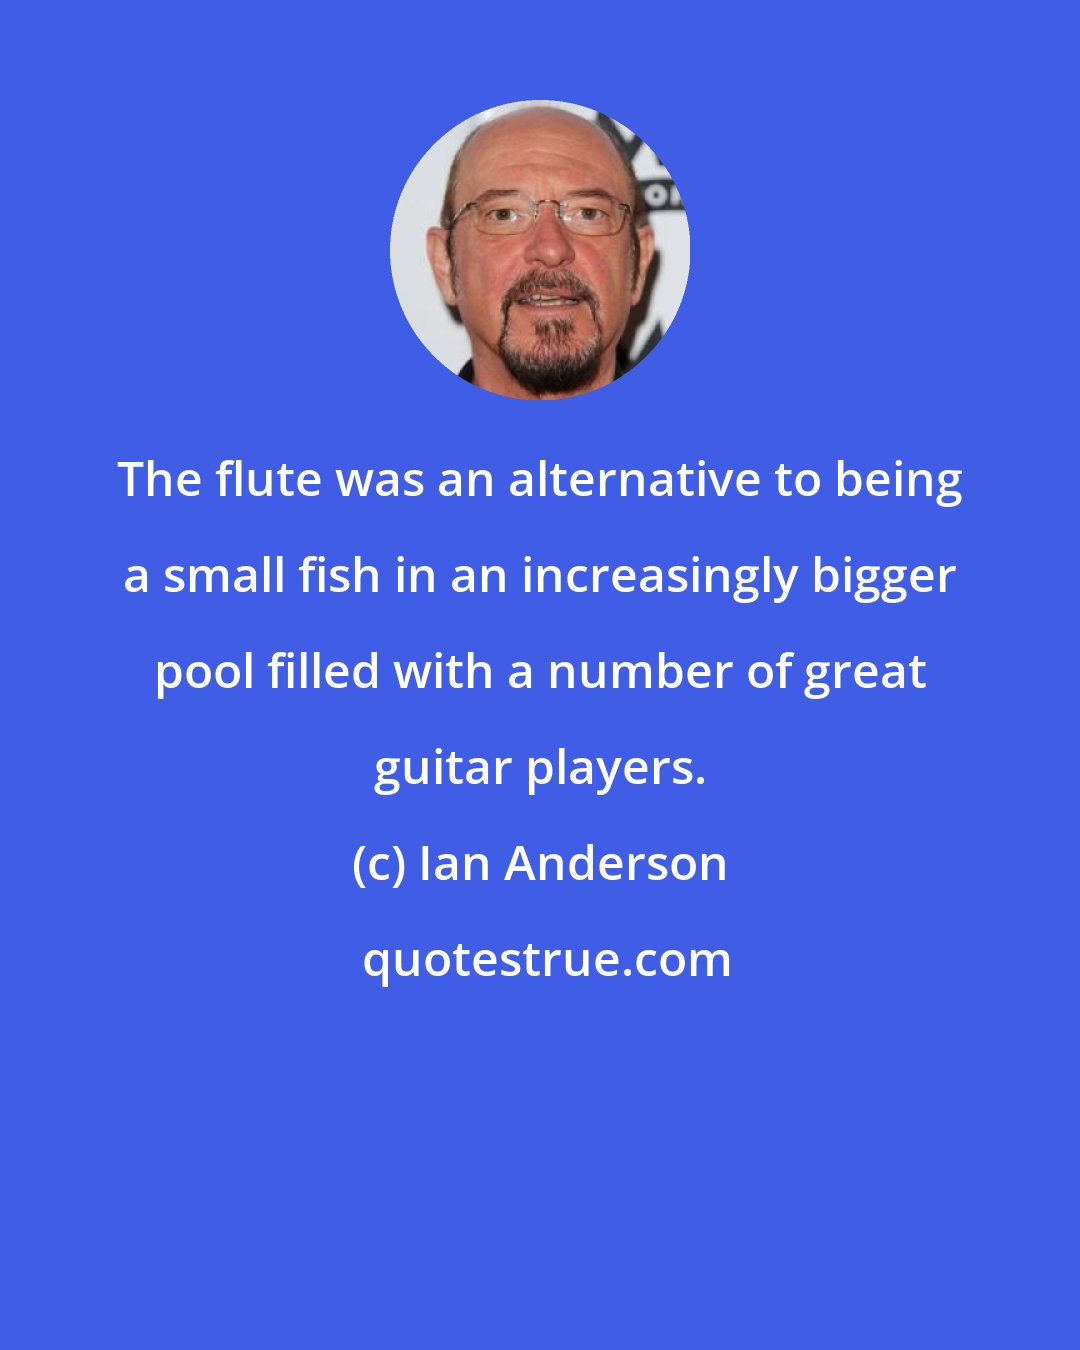 Ian Anderson: The flute was an alternative to being a small fish in an increasingly bigger pool filled with a number of great guitar players.